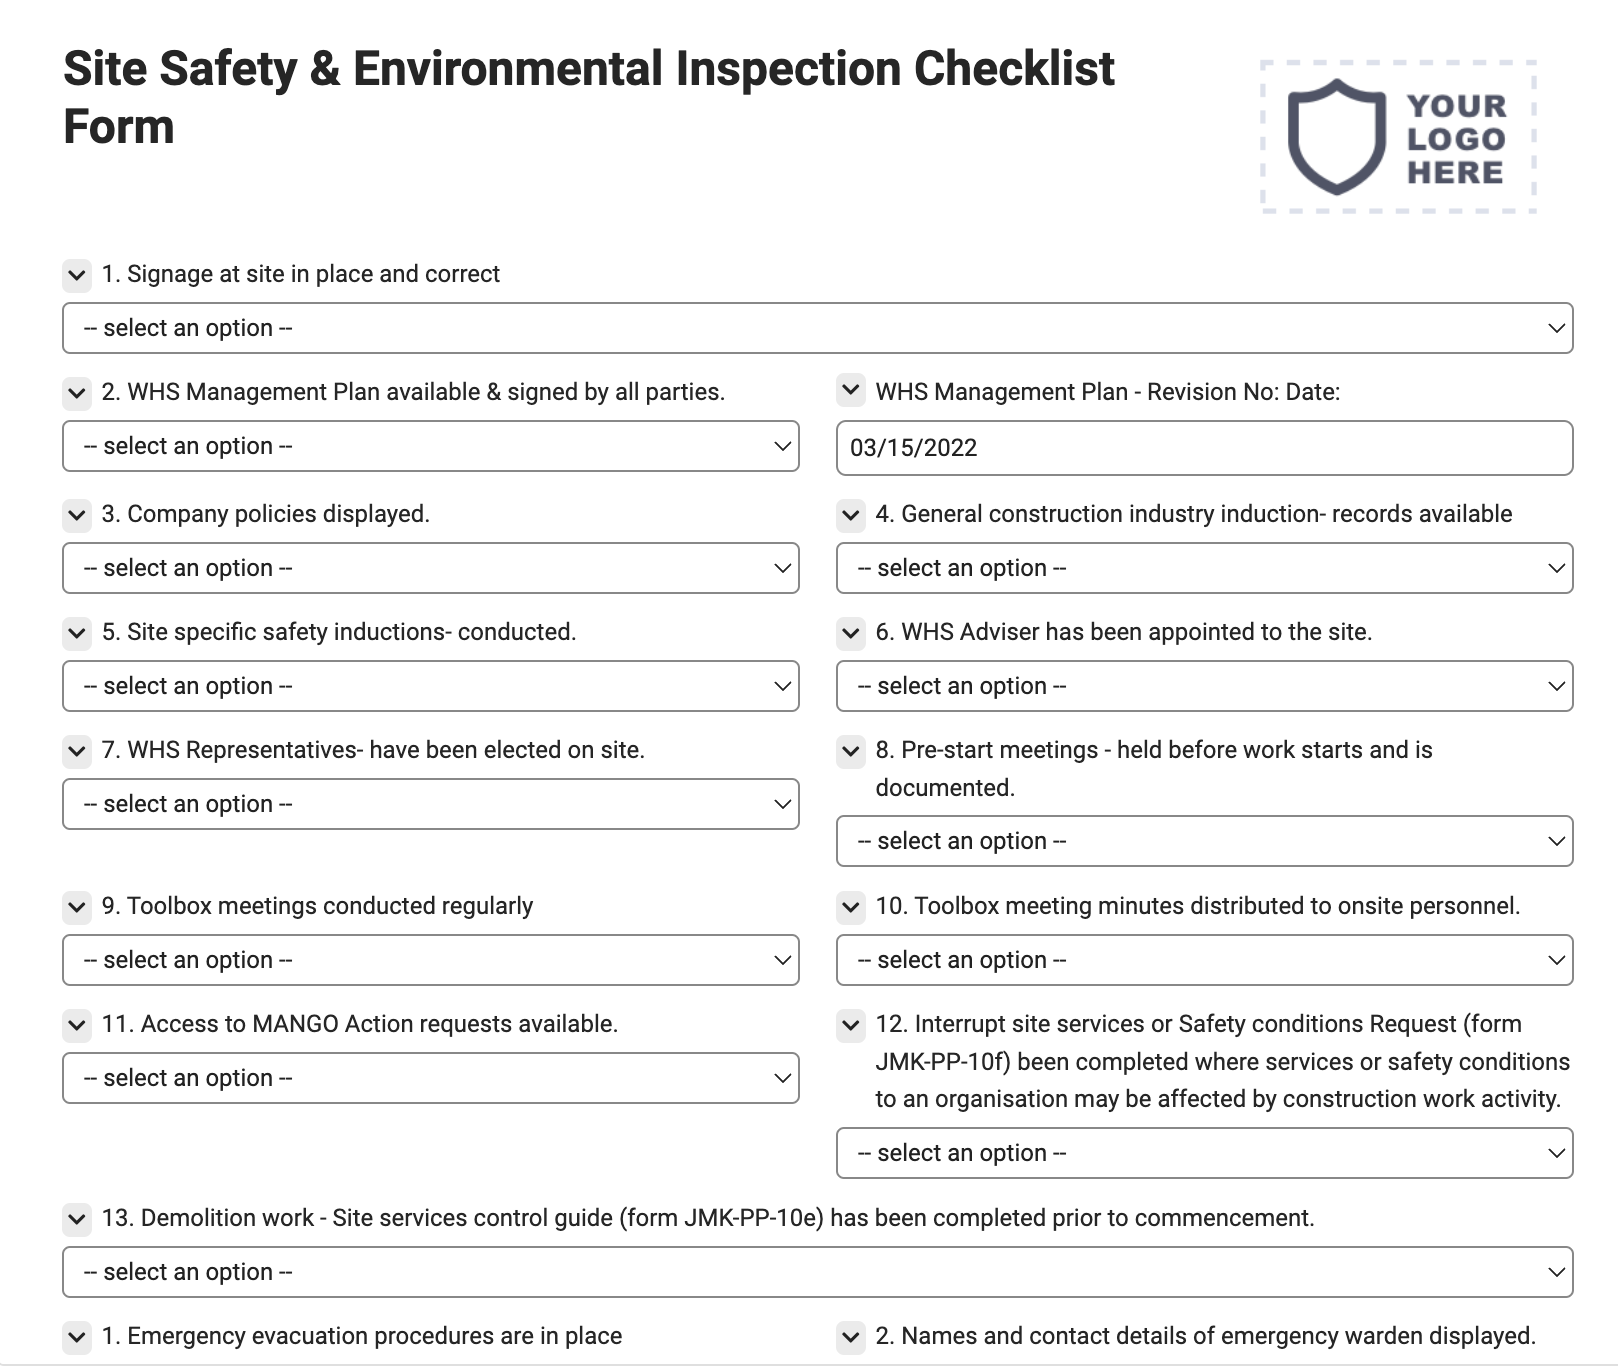 Site Safety & Environmental Inspection Checklist